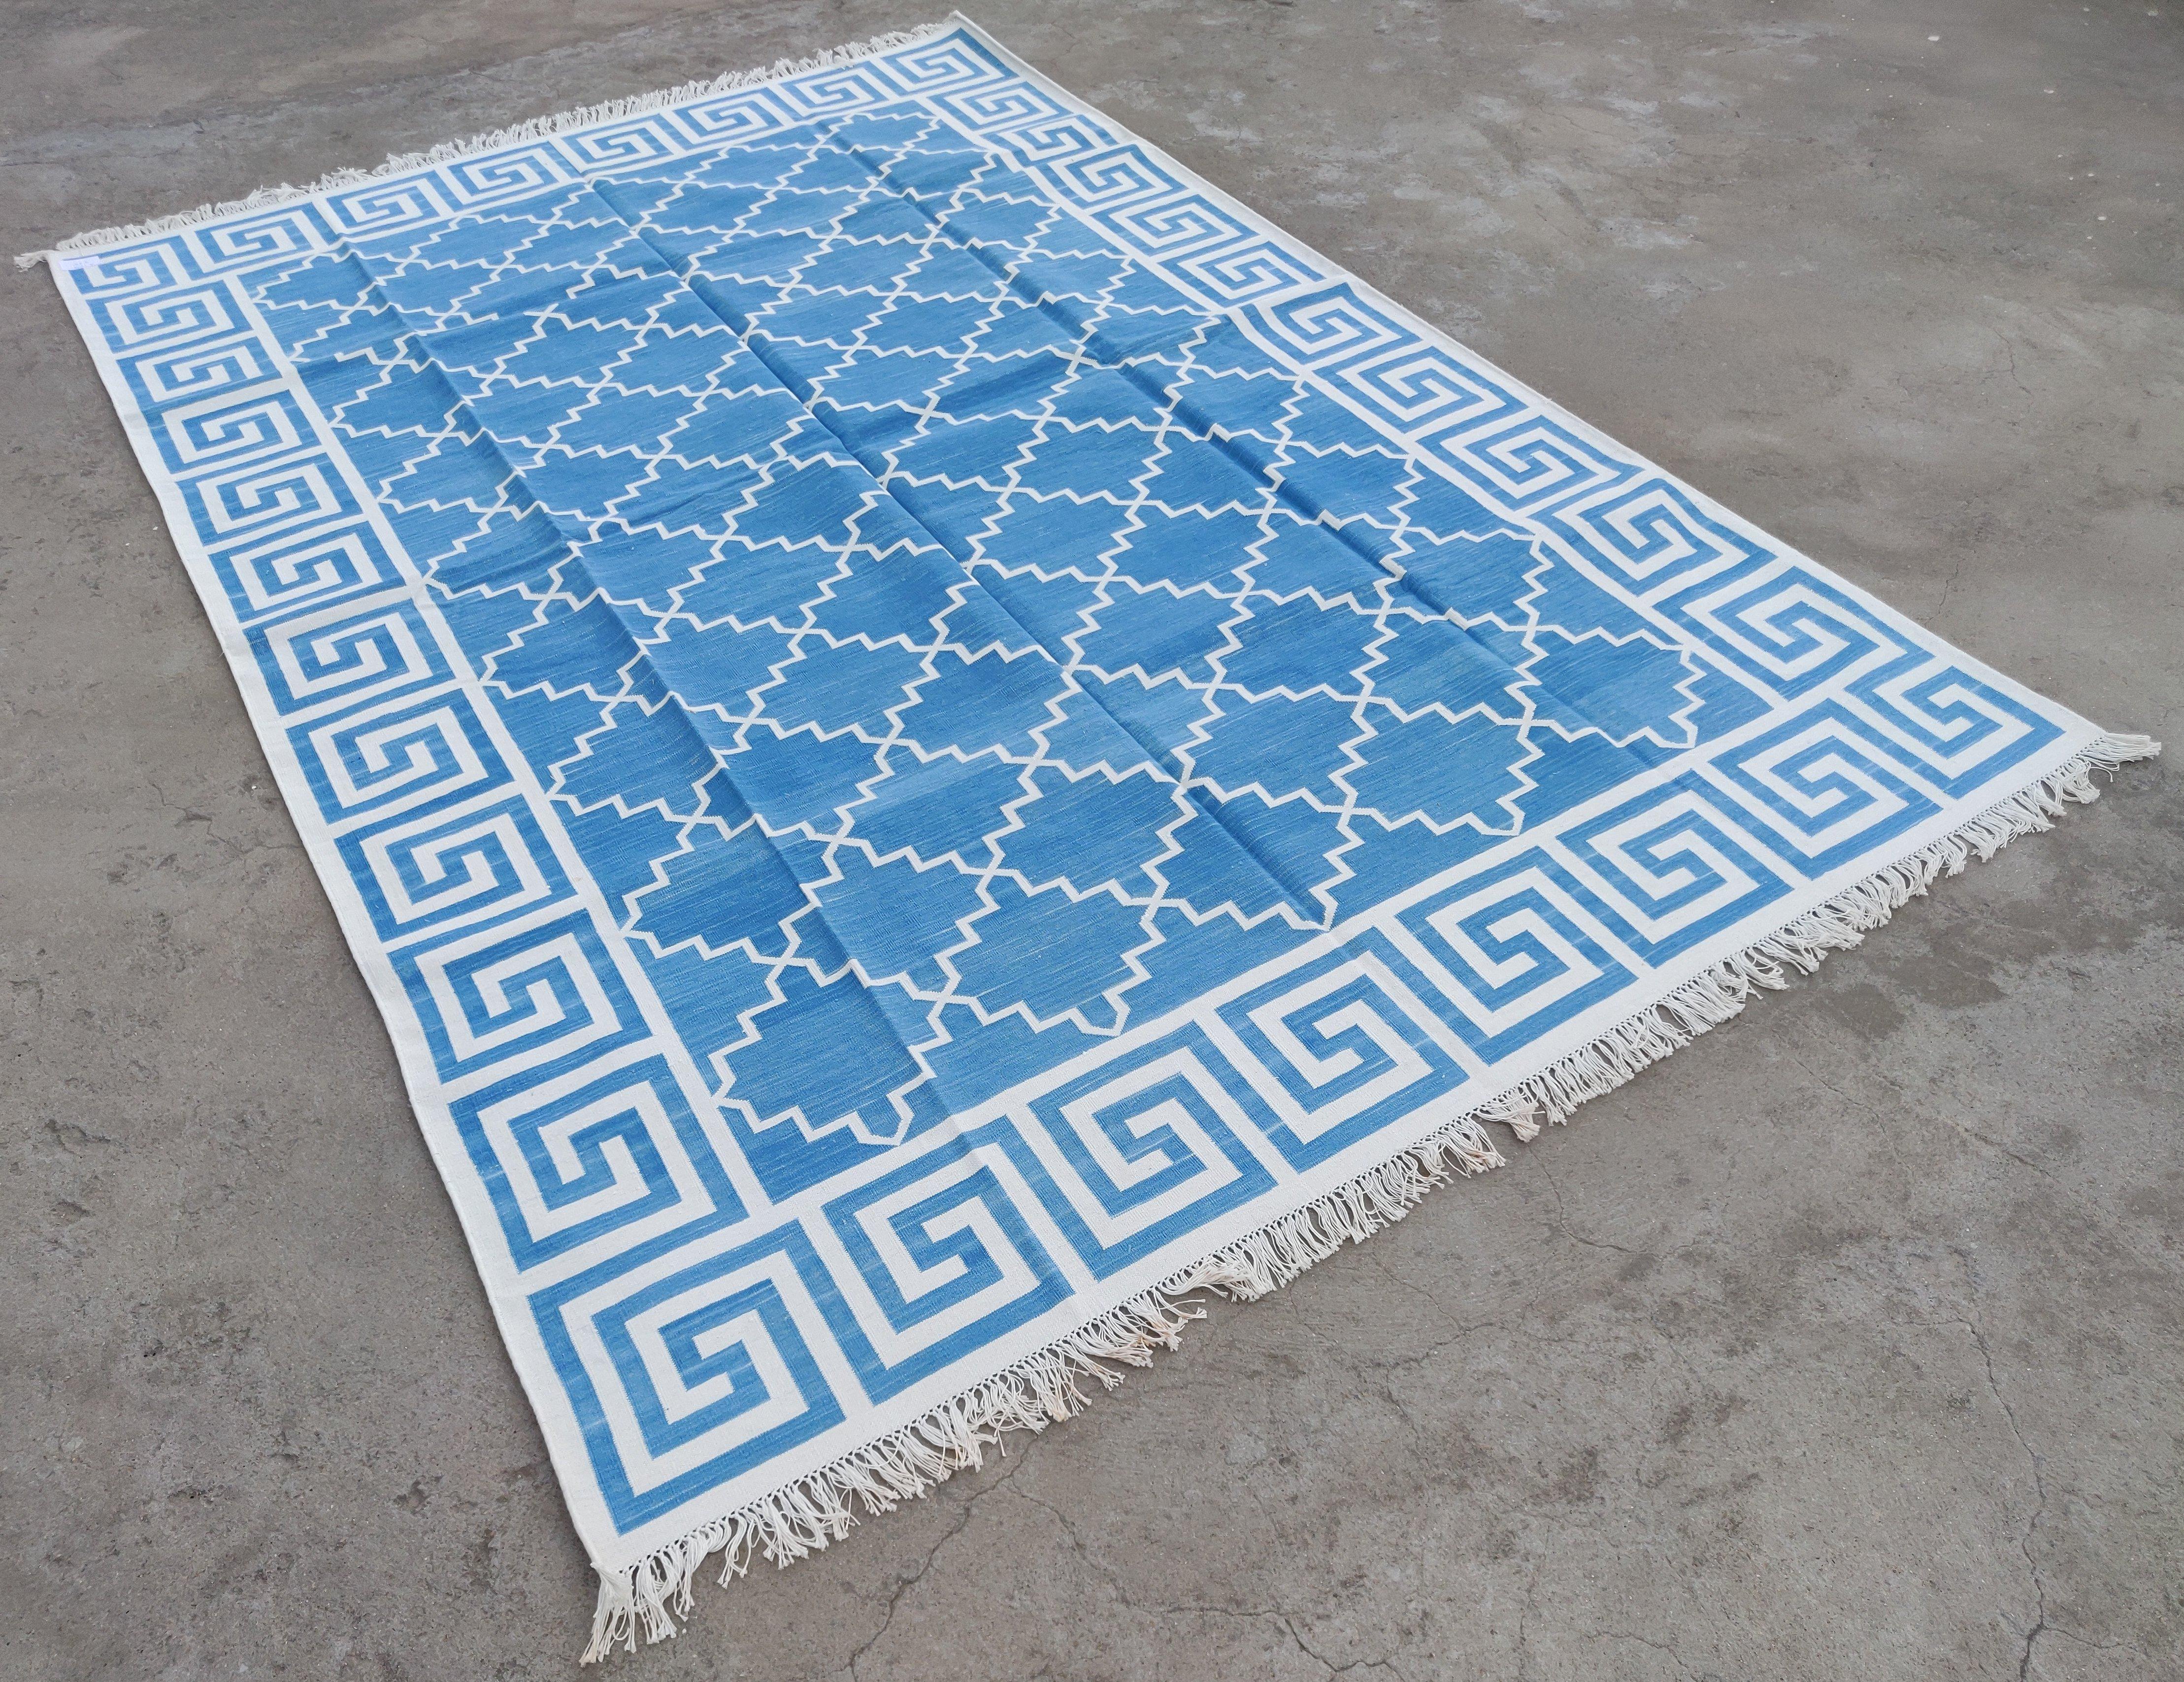 Cotton Vegetable Dyed Sky Blue And White Geometric Indian Rug-6'x9' 
These special flat-weave dhurries are hand-woven with 15 ply 100% cotton yarn. Due to the special manufacturing techniques used to create our rugs, the size and color of each piece